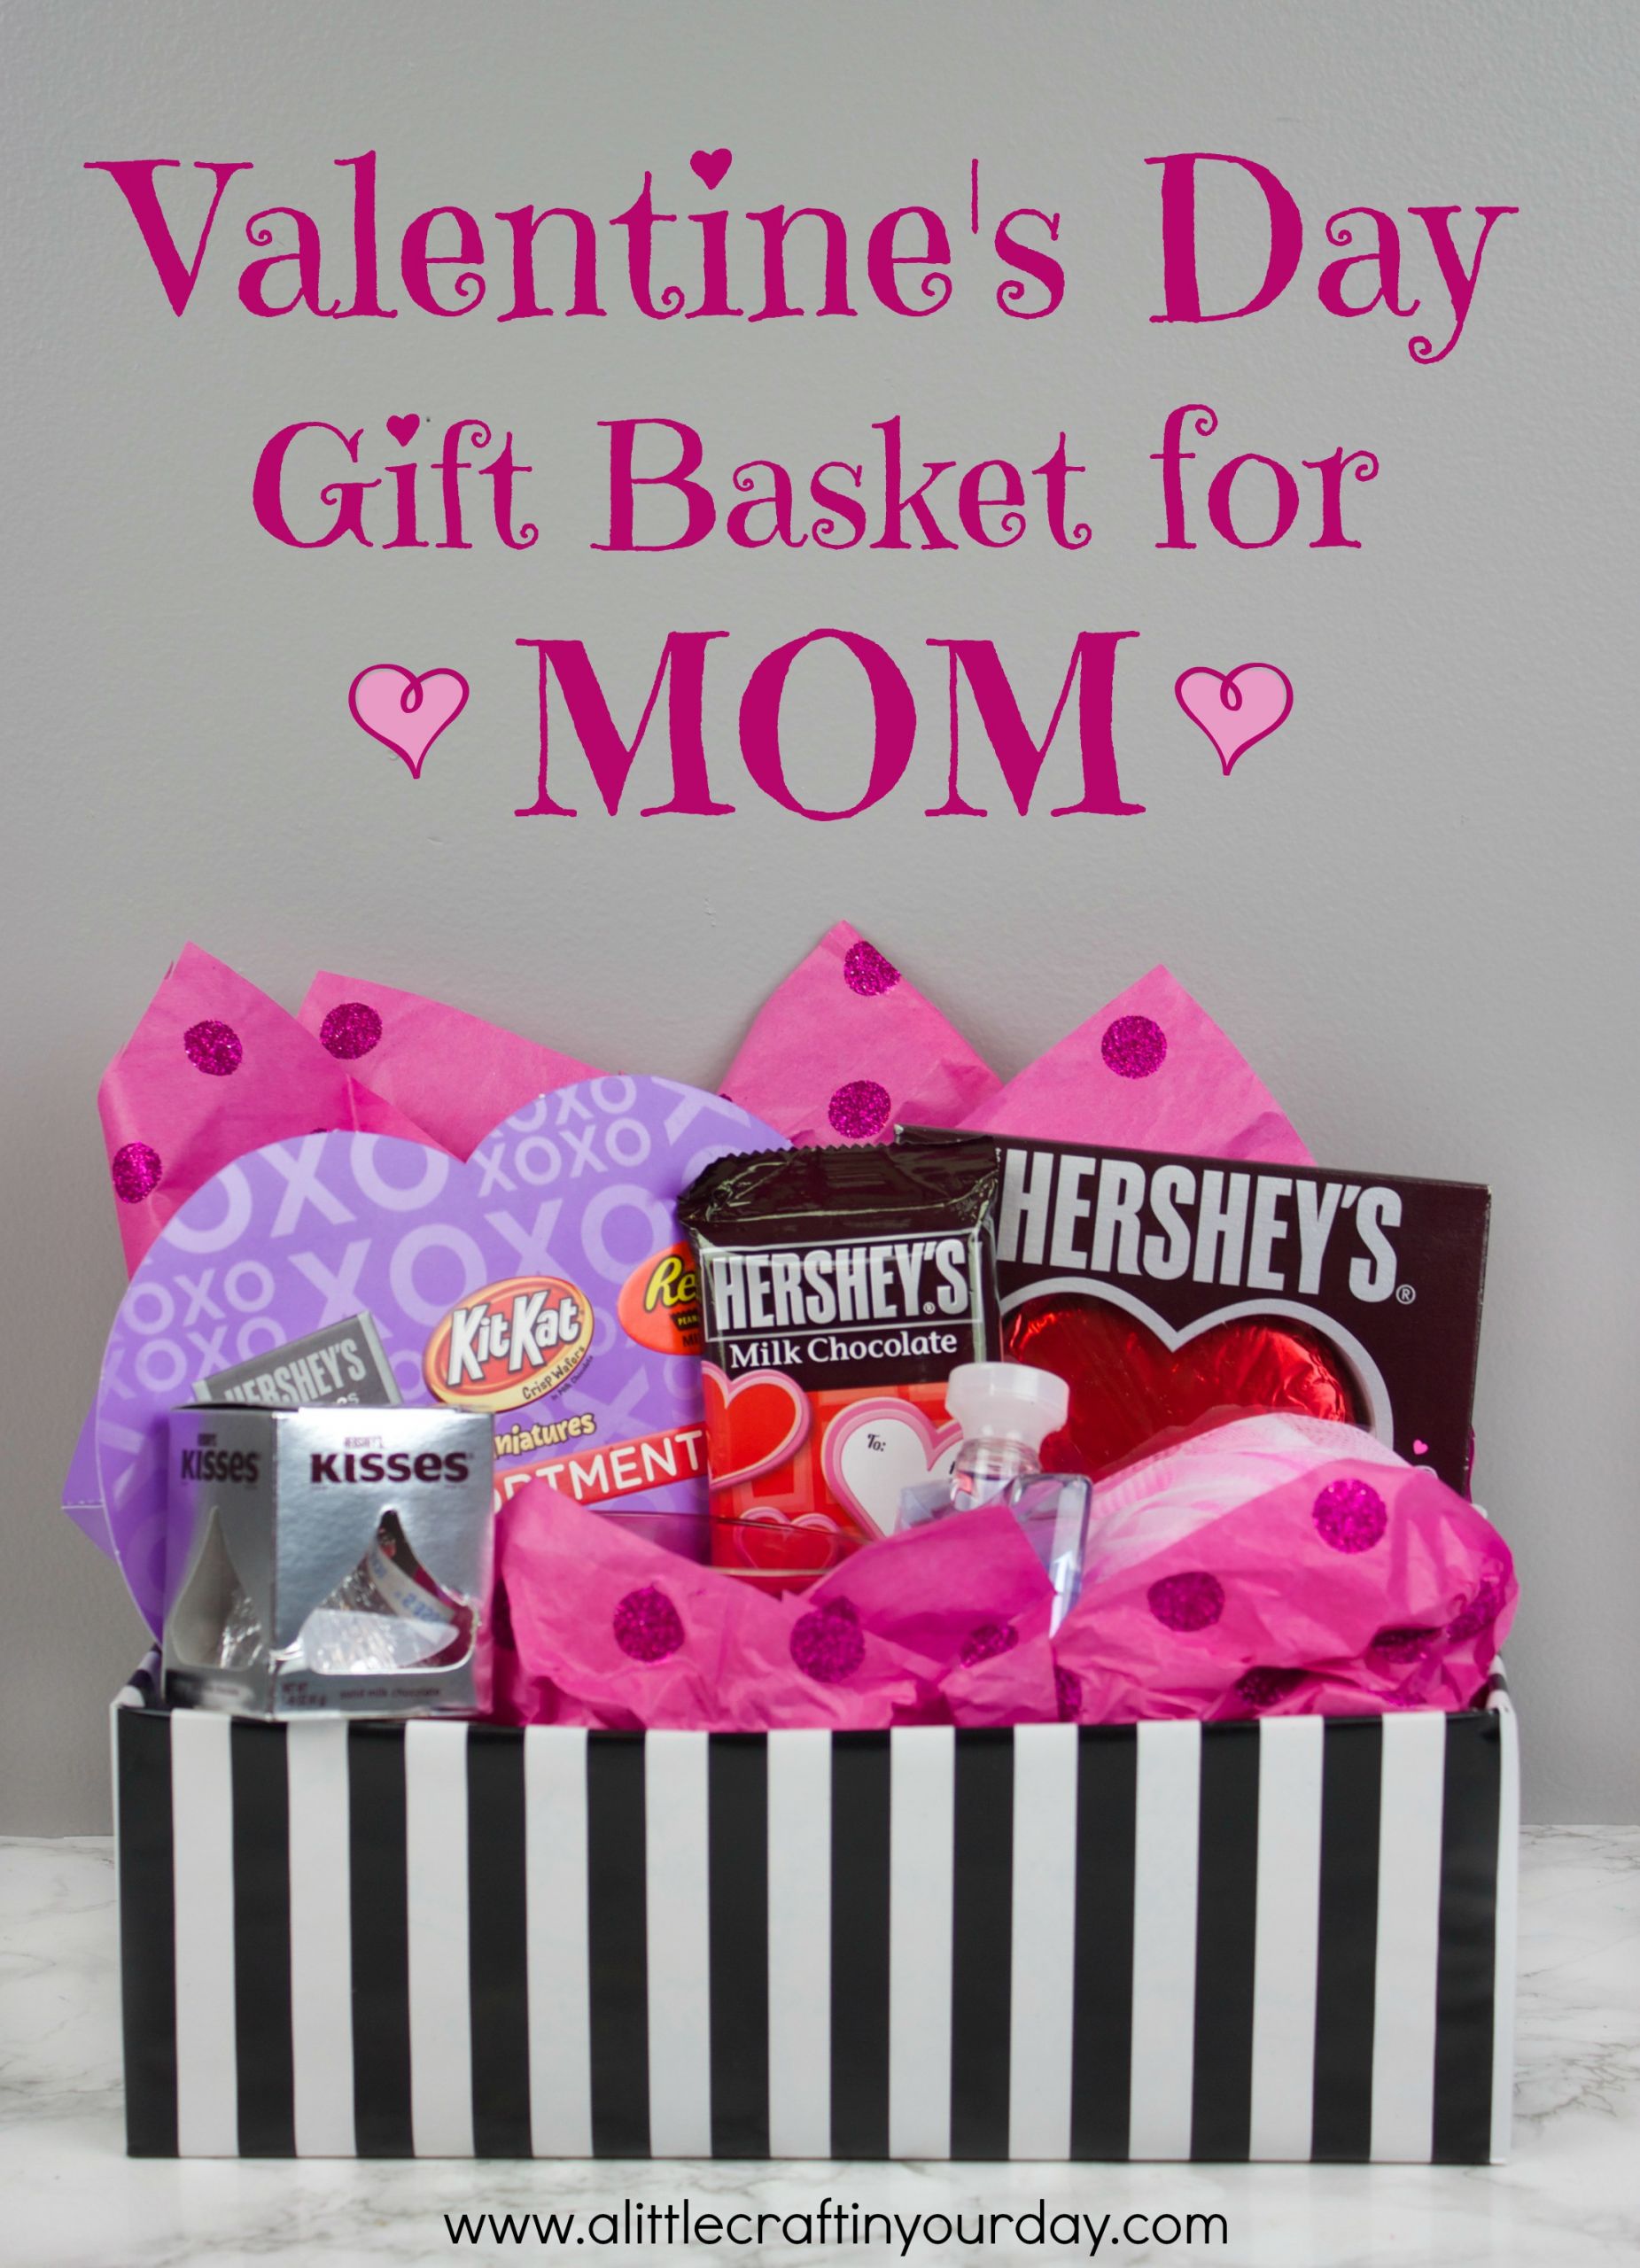 35-ideas-for-valentine-gift-ideas-for-mom-best-recipes-ideas-and